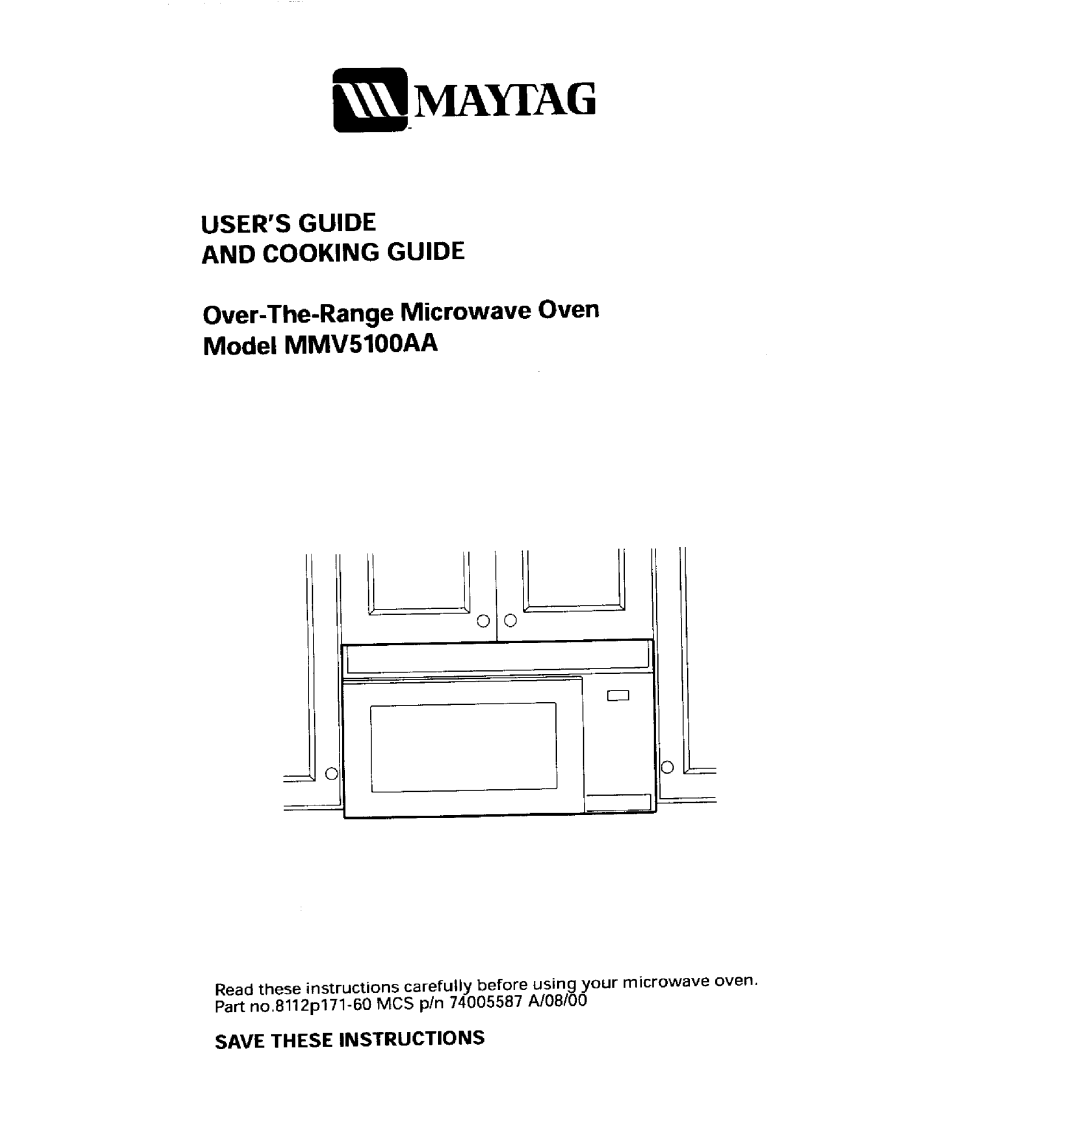 Maytag MMV5100AA manual Save These Instructions, MAYrAI3, Usersguide And Cooking Guide 